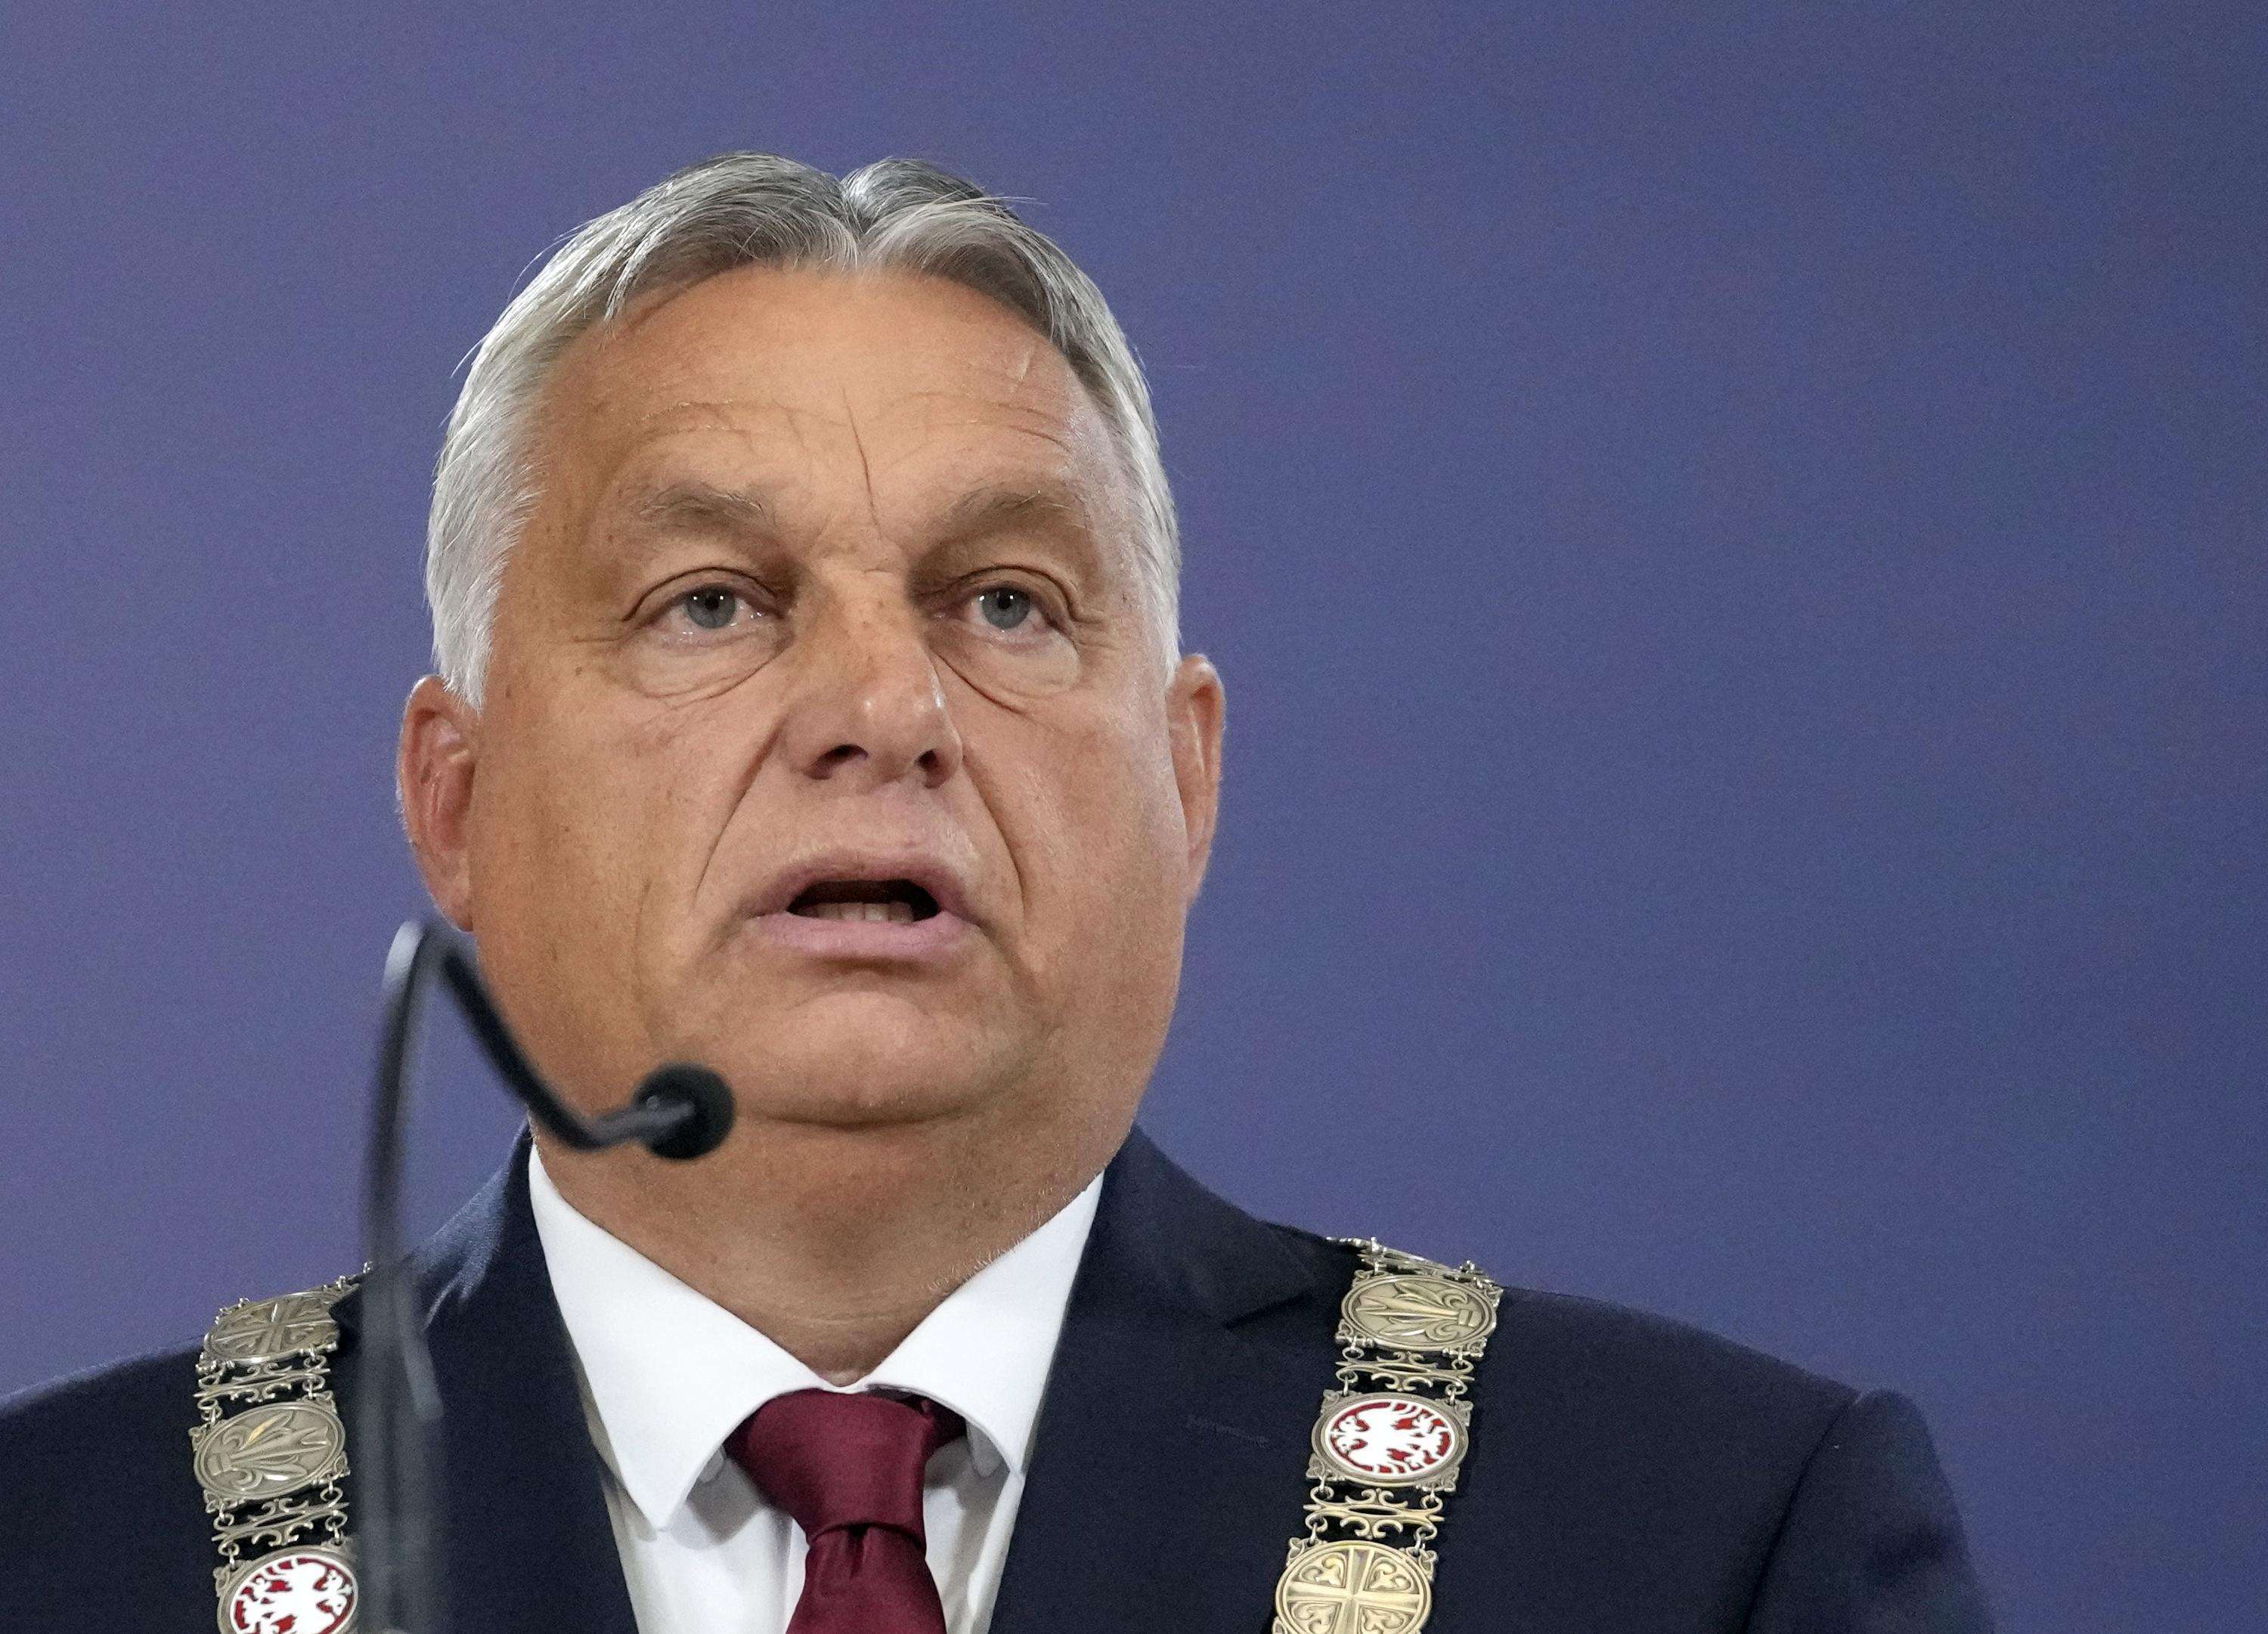 image for EU proposes to suspend billions in funds to Hungary